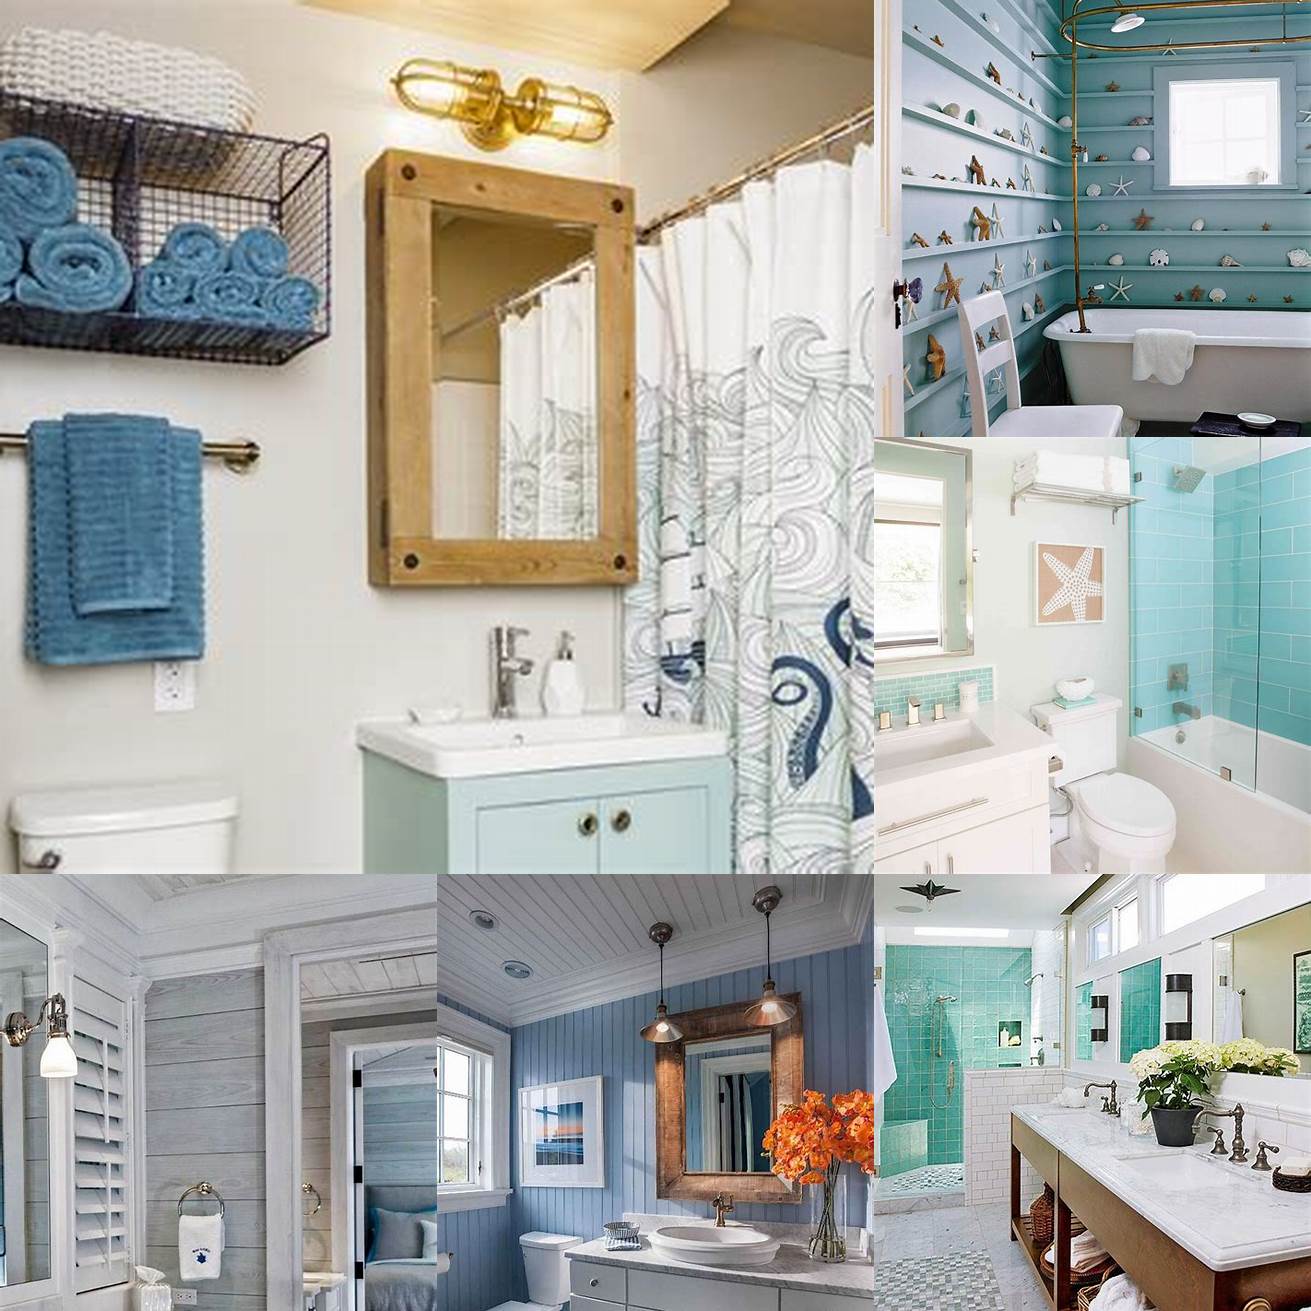 Nautical decor can make small bathrooms feel more open and airy